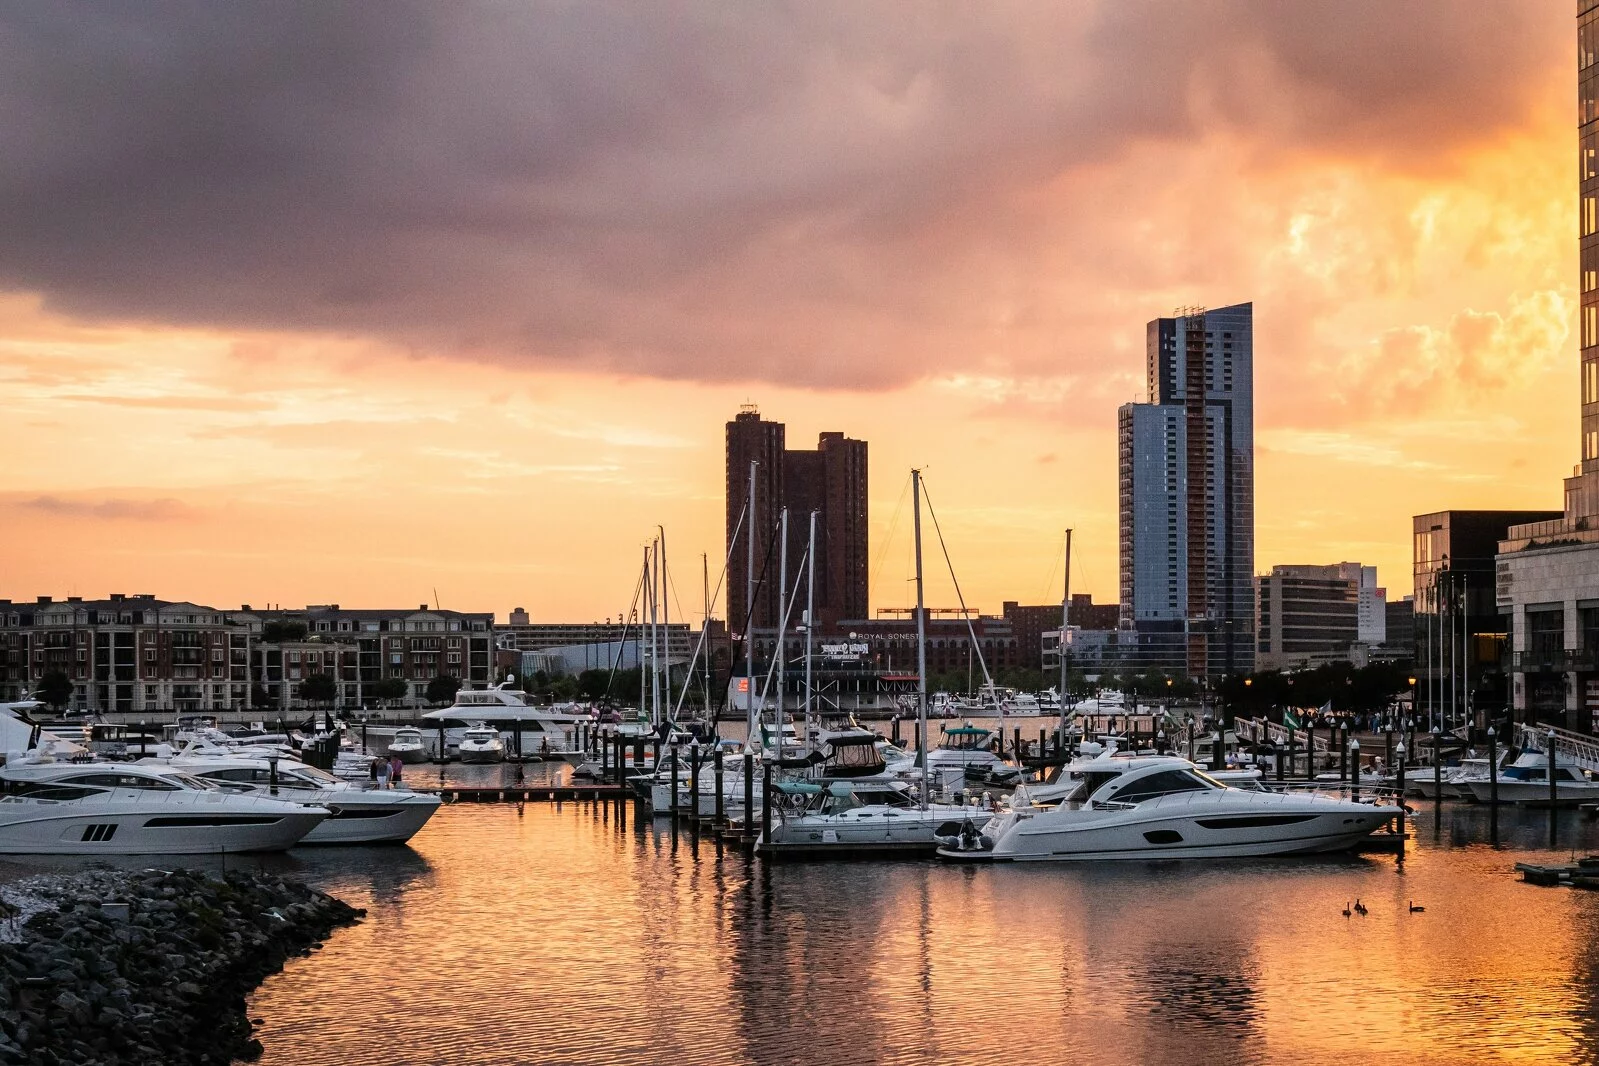 harbor at sunset, Yachts and sailboats docked, skyscrapers in background.